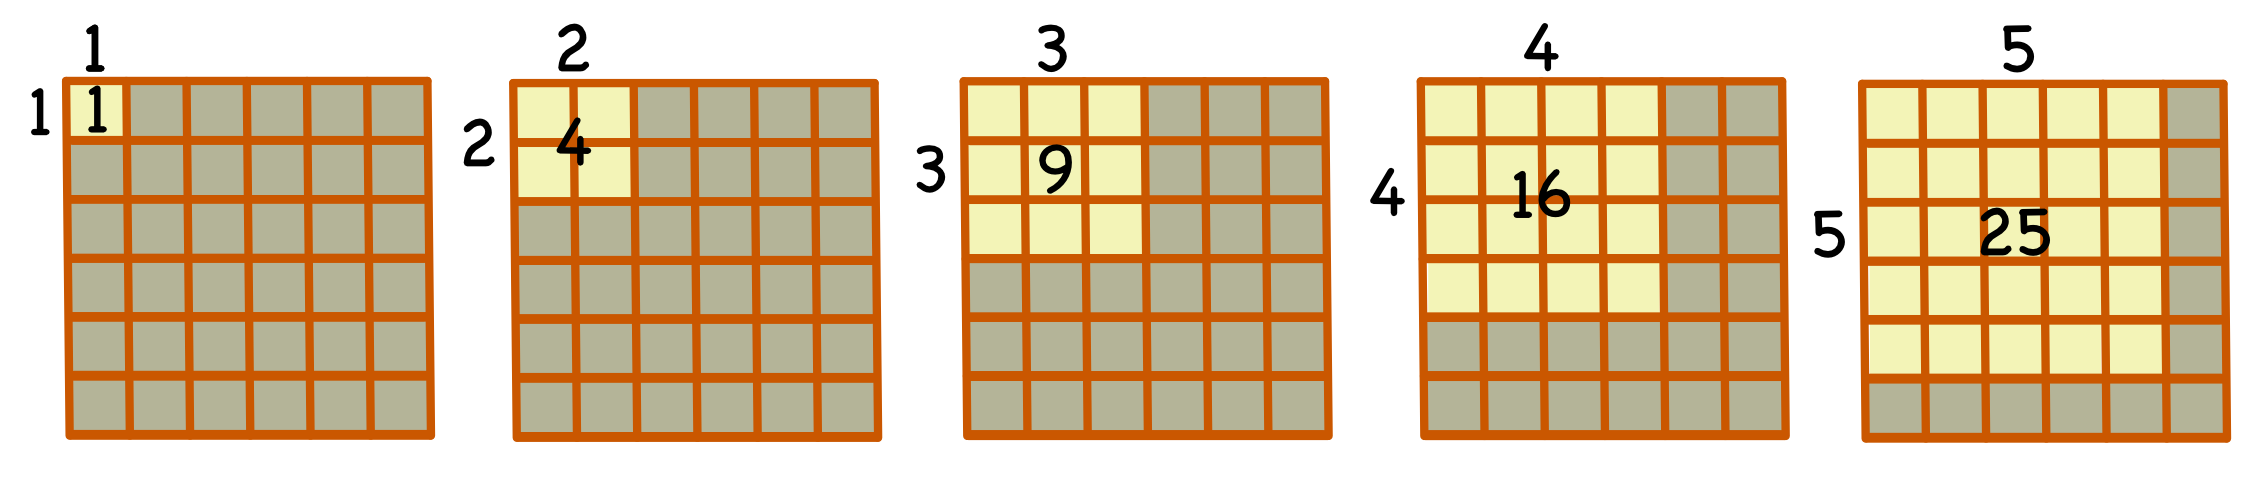 Square Sequence